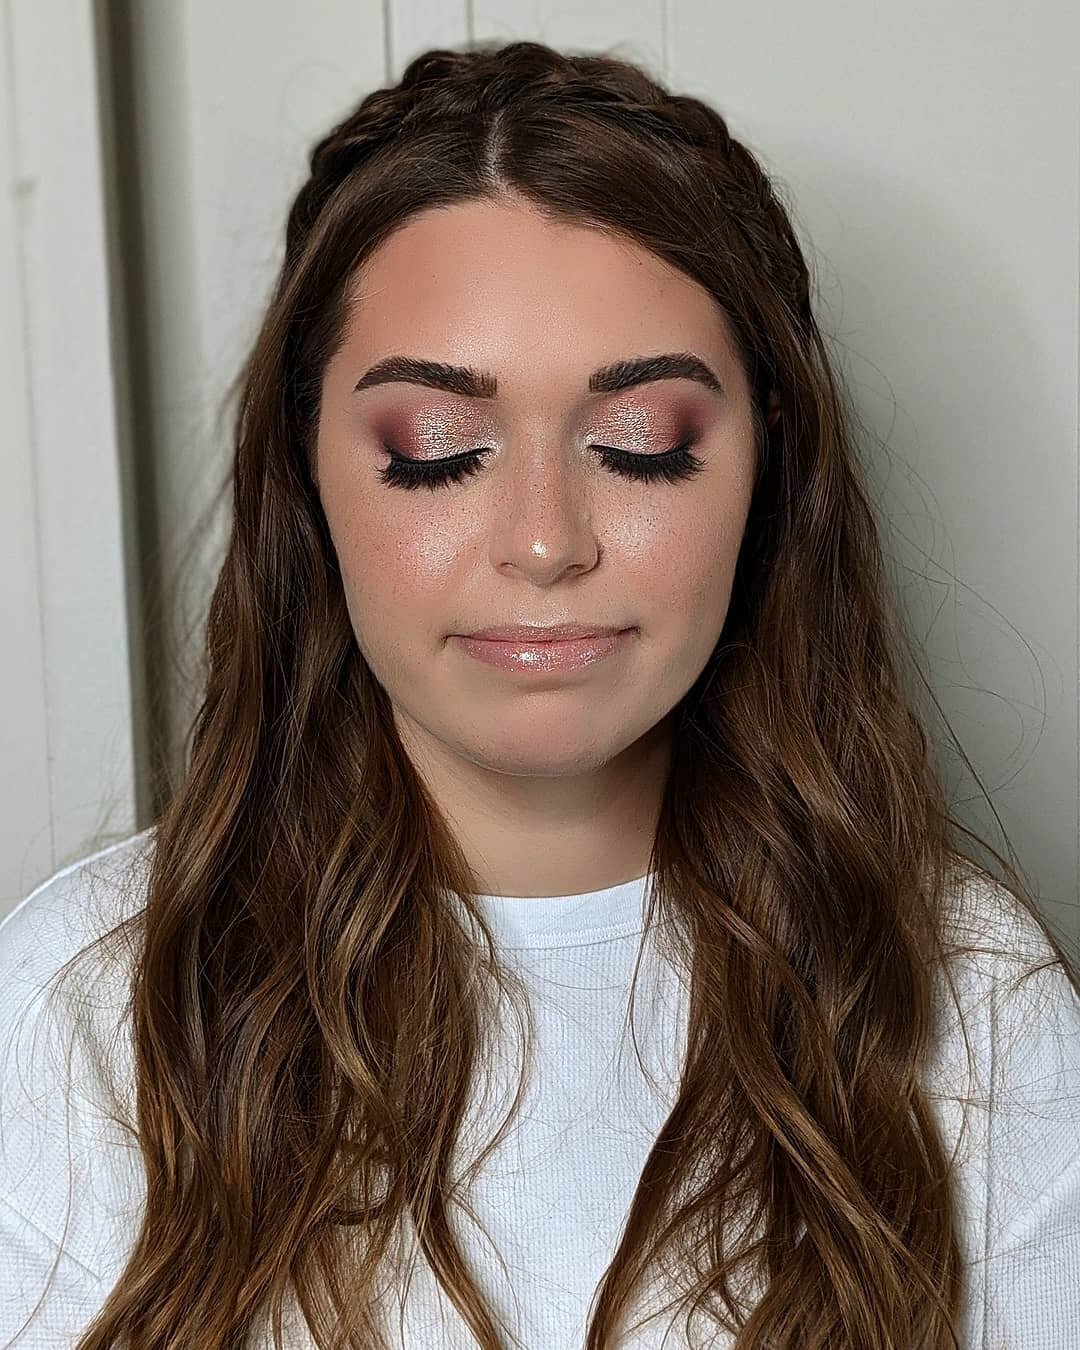 ✨Soft and romantic is one of the dreamiest types of looks to do. The fluffy brows, the glowing skin, the sun kissed checks with the freckles. UGHHH im trying not to drool. 😍💦💄

This look was done for a styled winter bridal shoot with SO many amazi